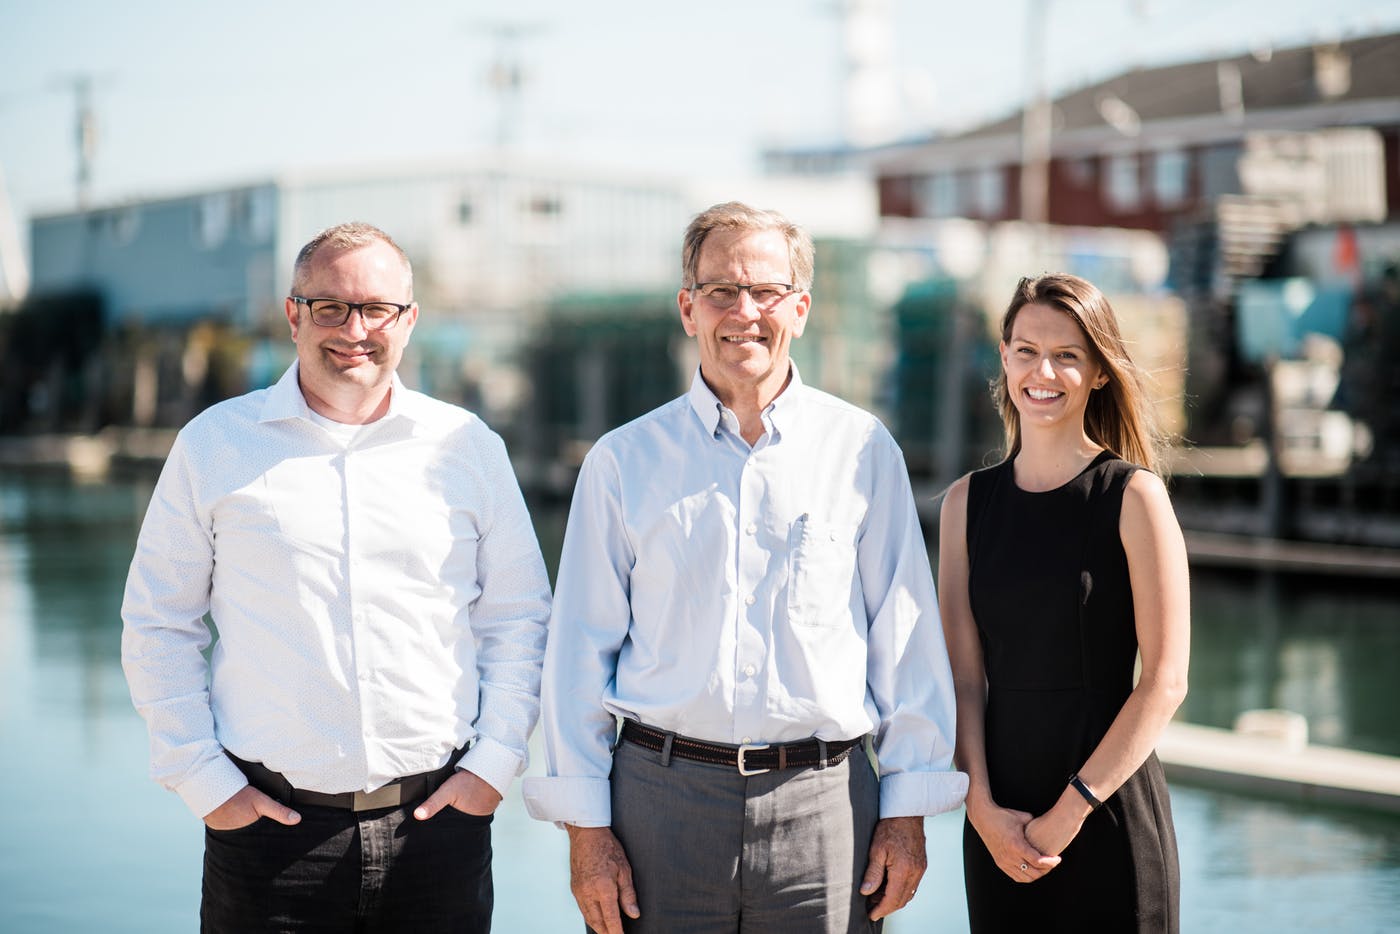 The leadership team at Whitten Architects (from left to right):  Principal Russ Tyson, Founder and Principal Rob Whitten, and Associate Principal Jessie Carroll.